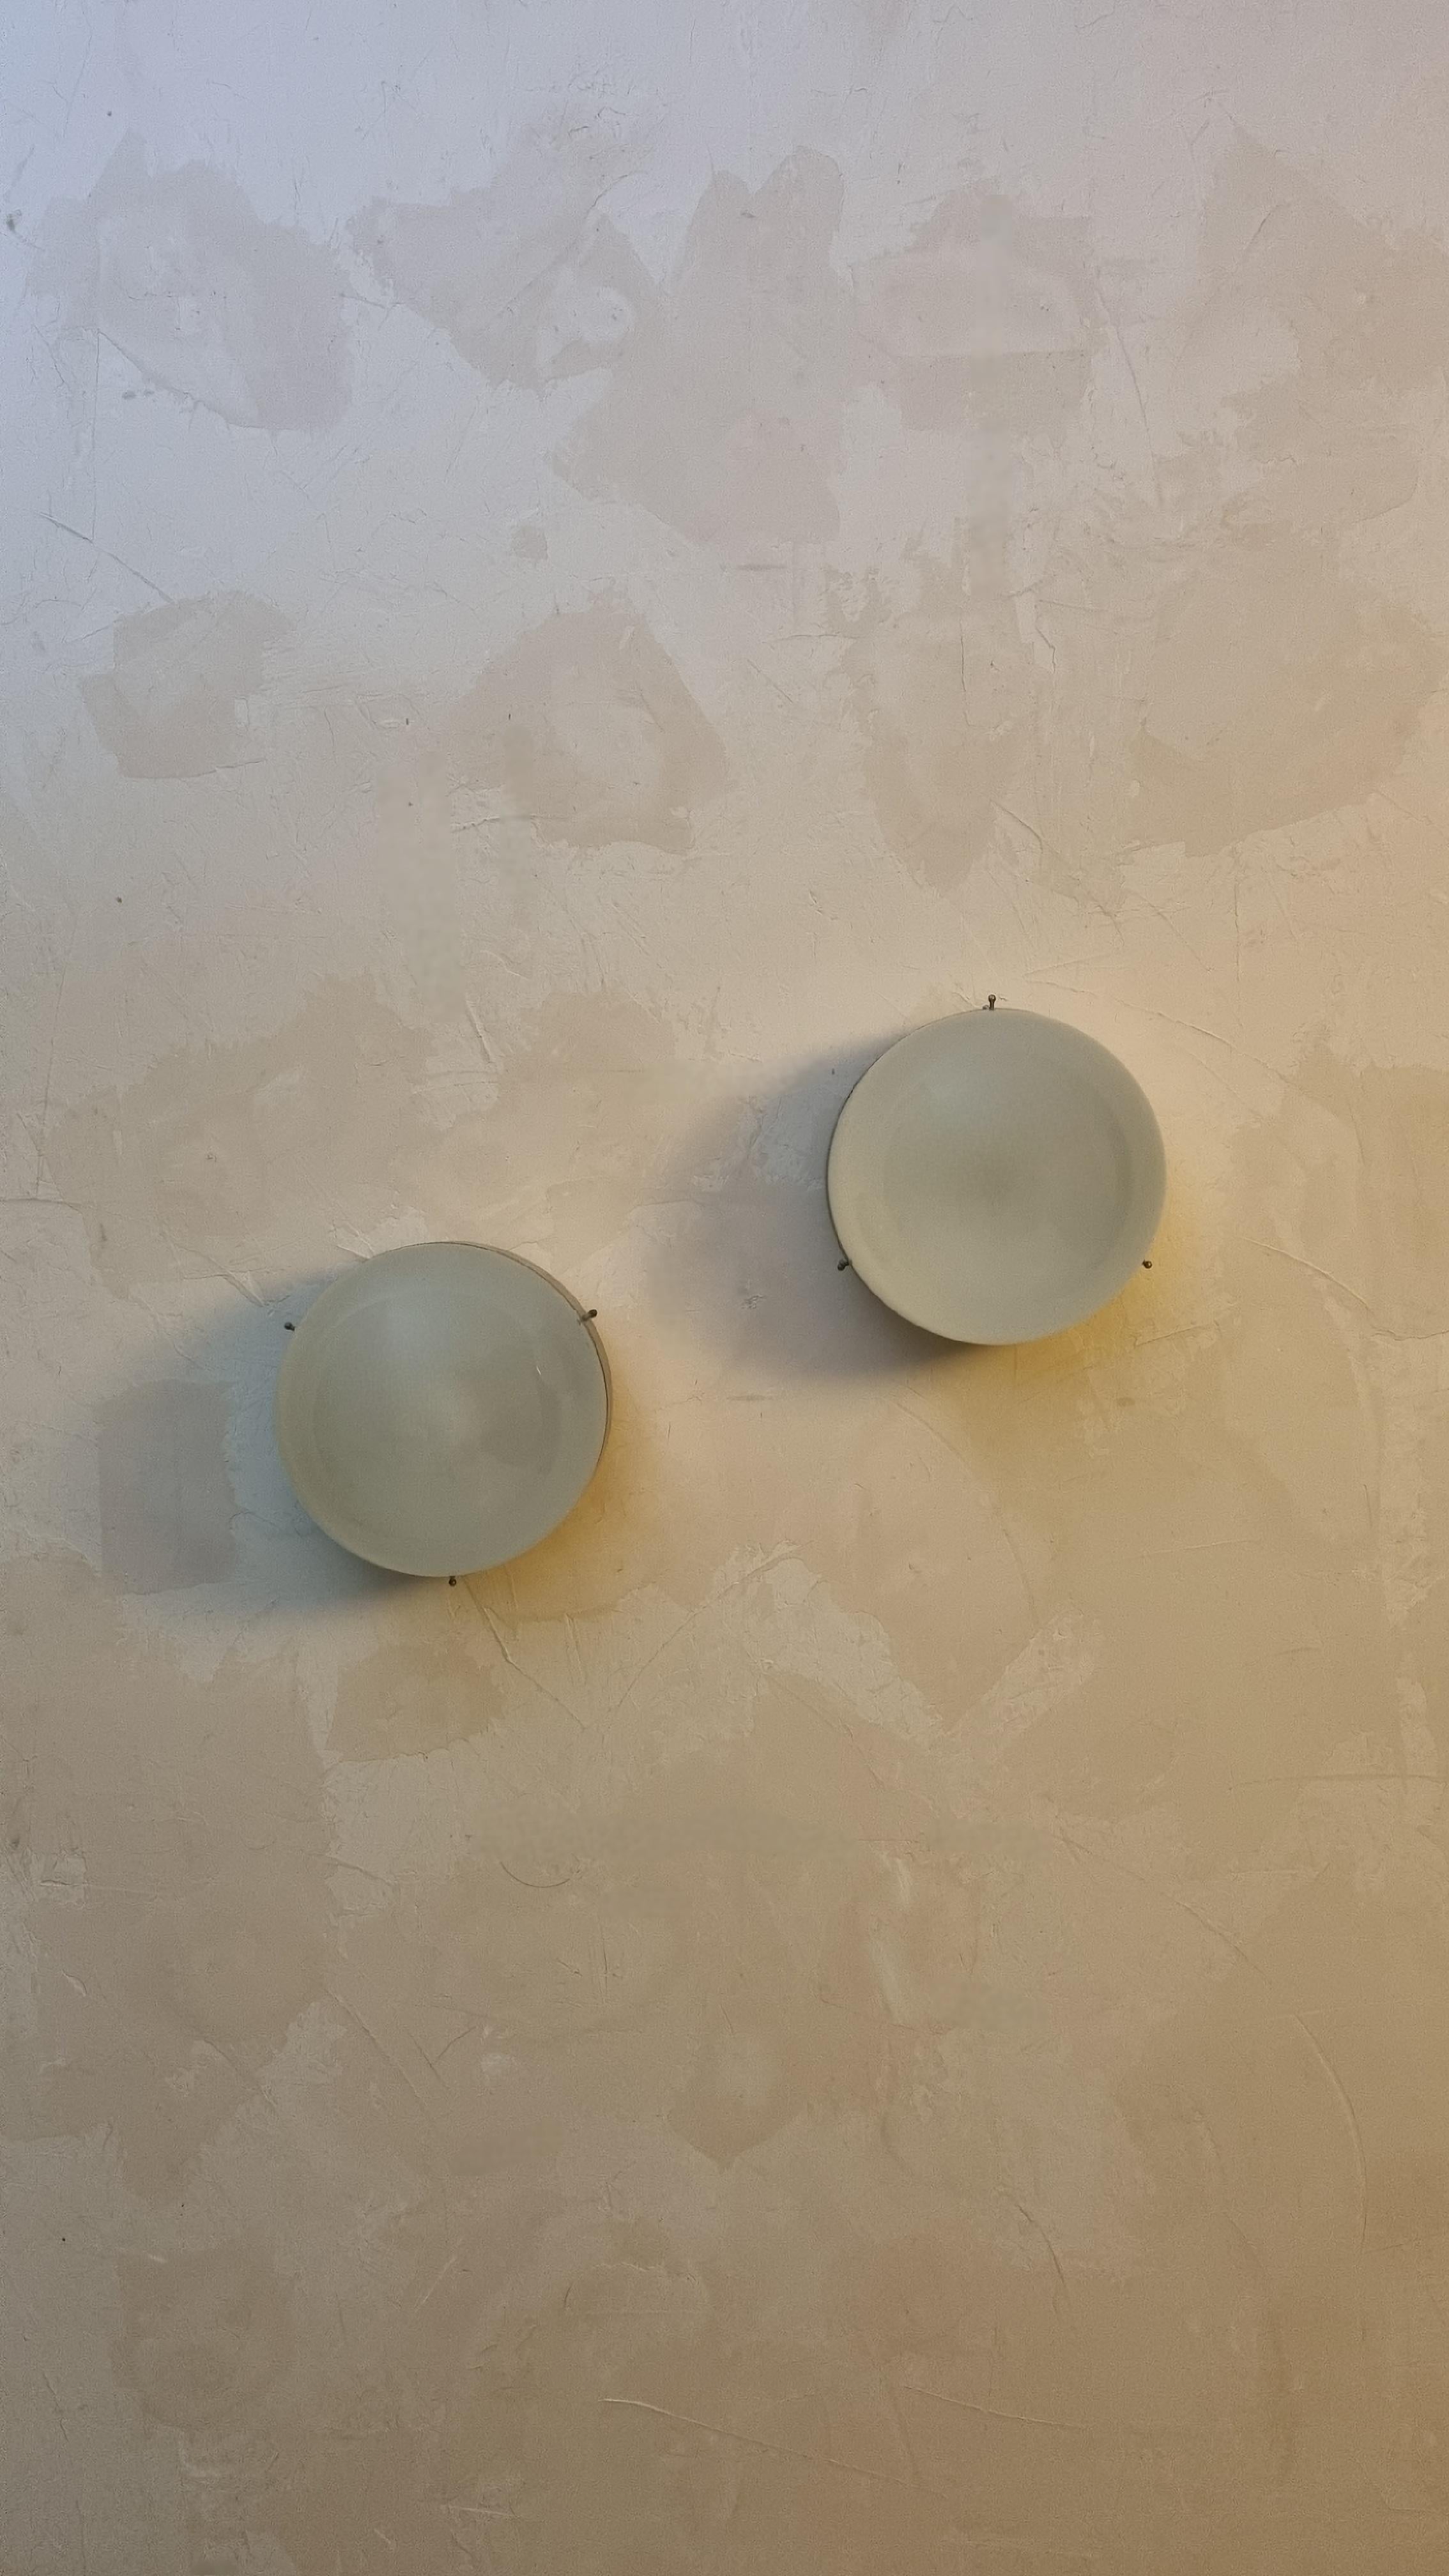 Pair of Clio wall sconces designed by Sergio Mazza for Artemide in the 1963, frosted glass lampshade , structure in nickel-plated brass, each lamp  superimposed 1 light points that emit a warm and soft light. mounts E 27 bulbs.
Excellent conditions,